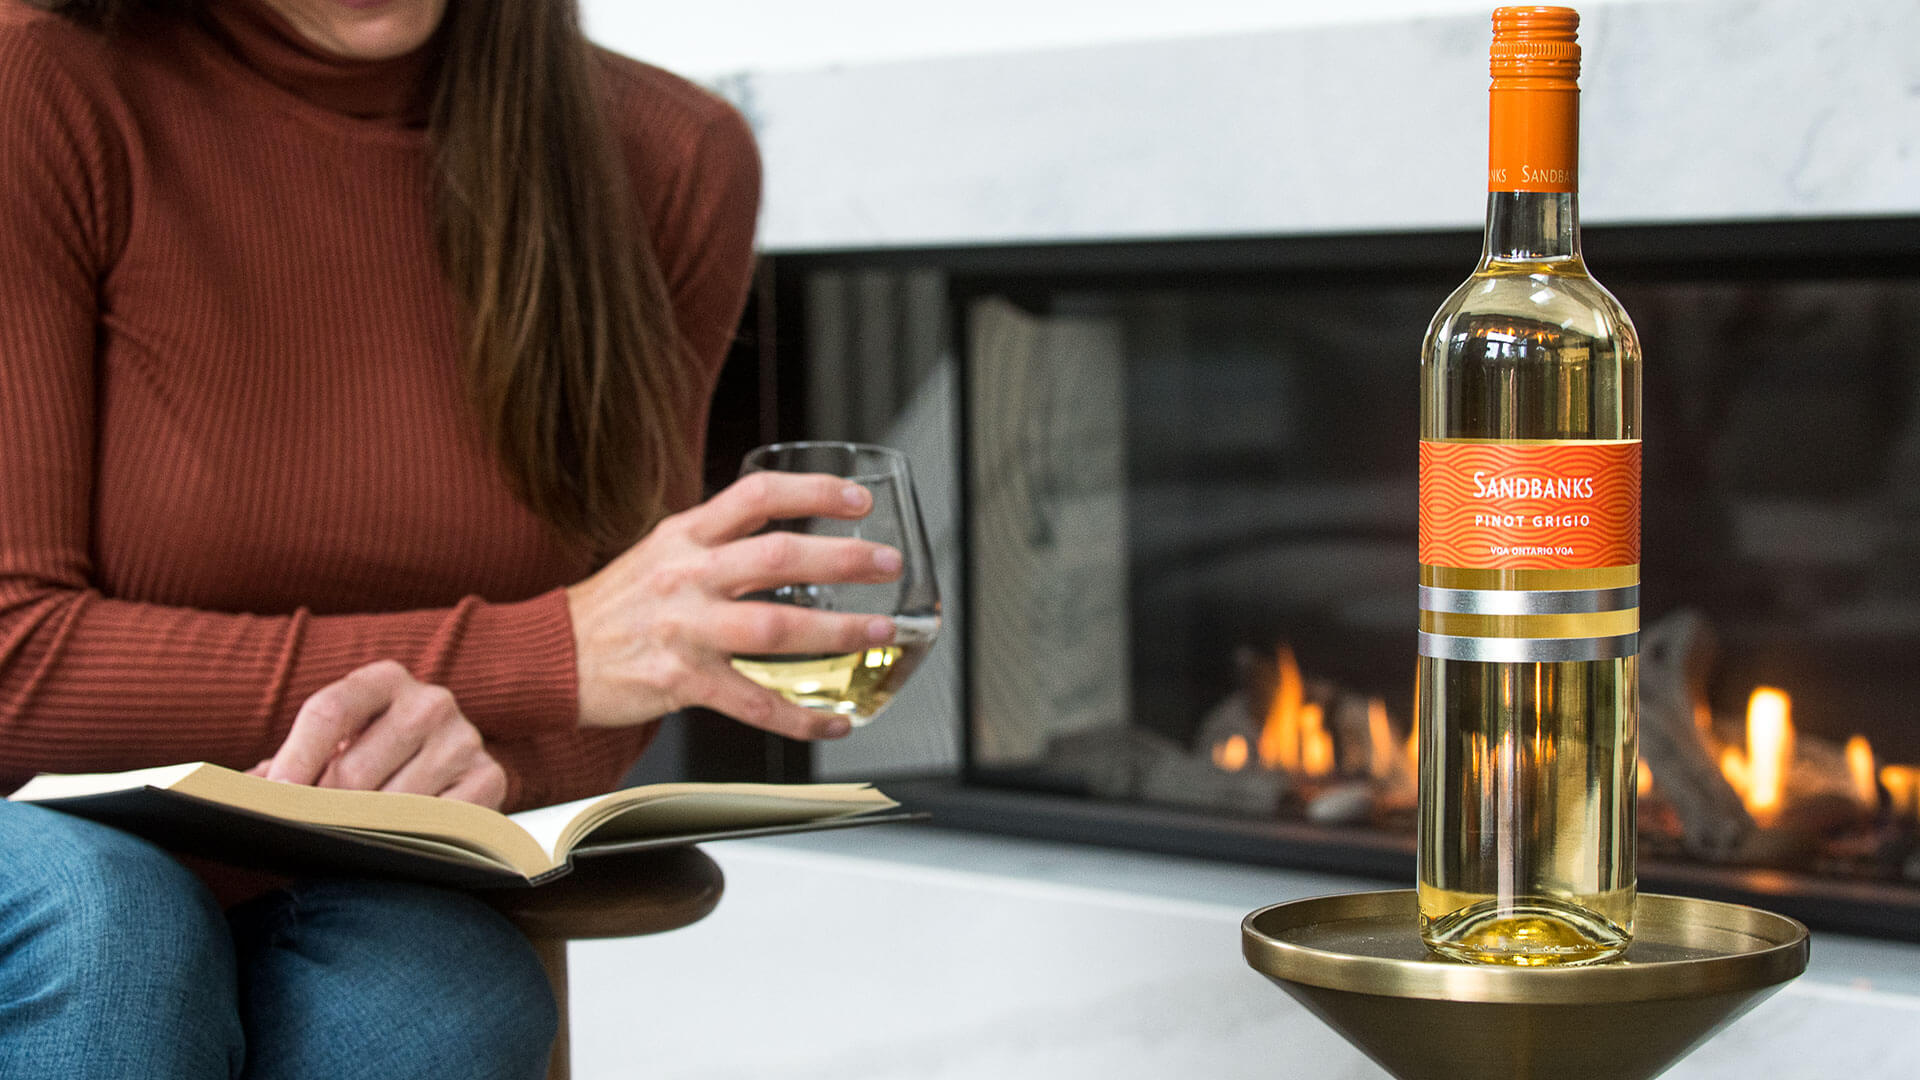 Enjoying a glass of Sandbanks Pinot Grigio VQA white wine while reading by the fireplace.